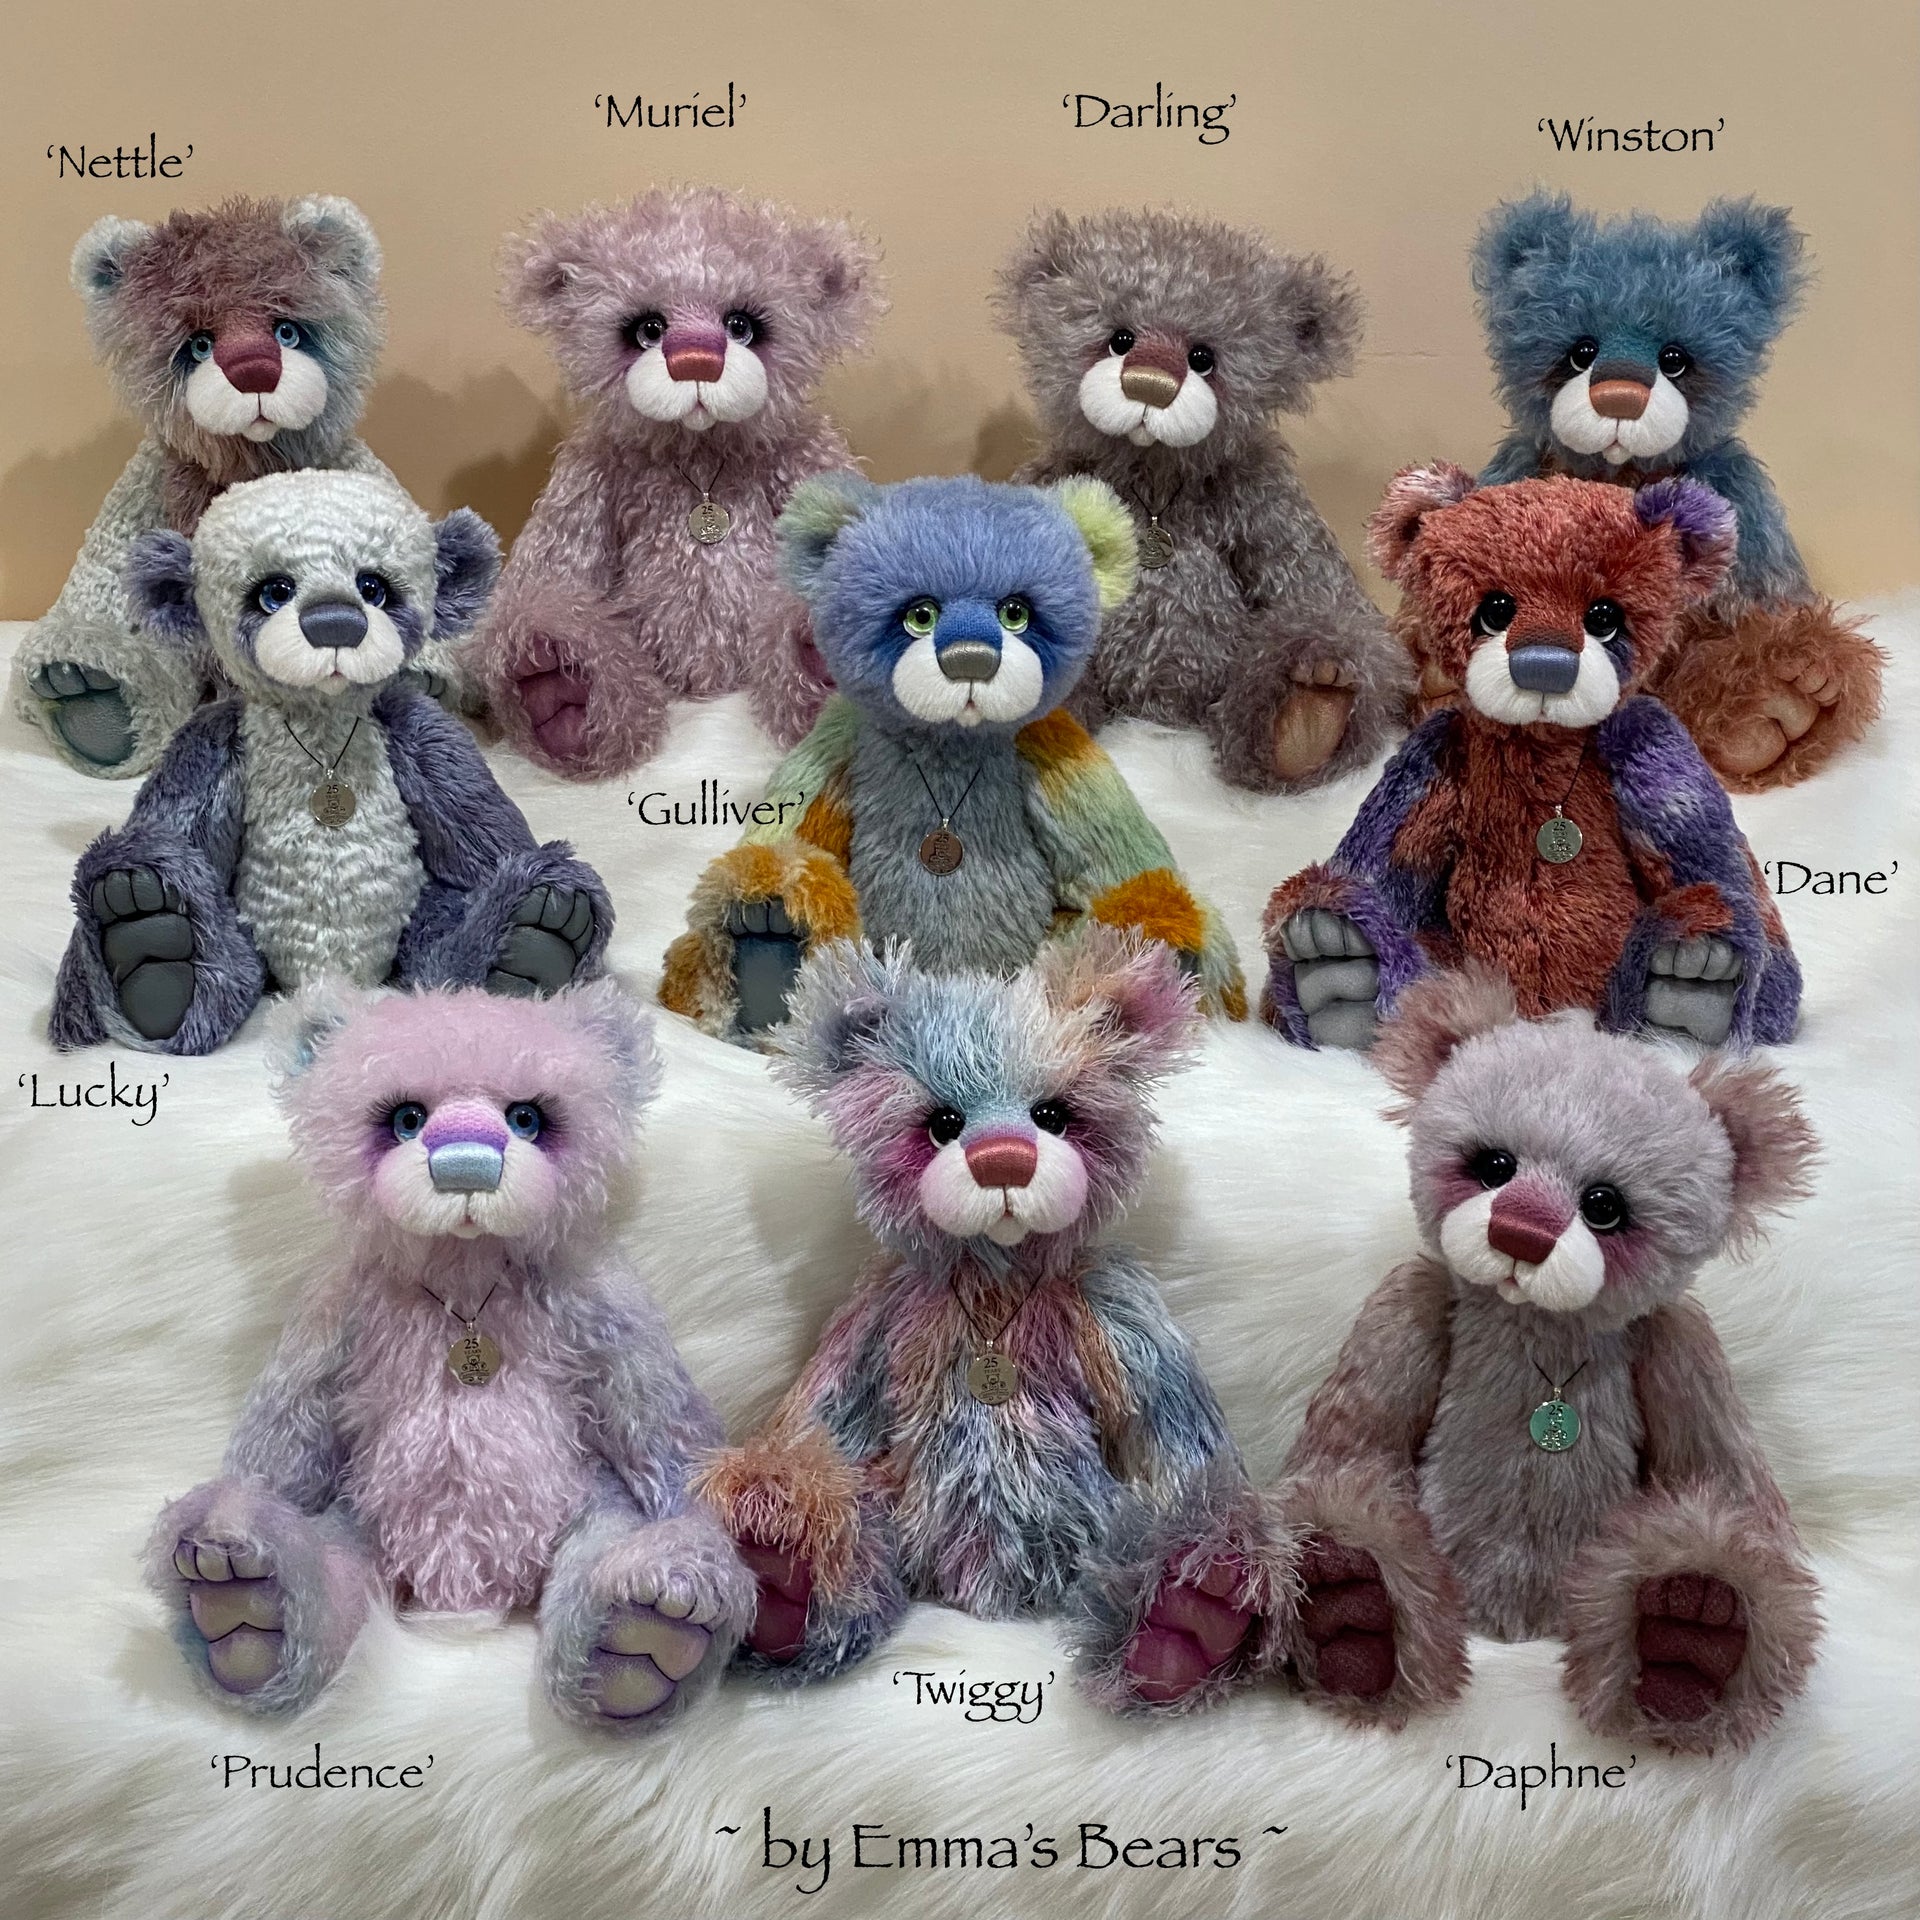 Lucky - 16" SPECIAL 25th Anniversary Collection Hand-dyed mohair Artist Bear by Emmas Bears - OOAK